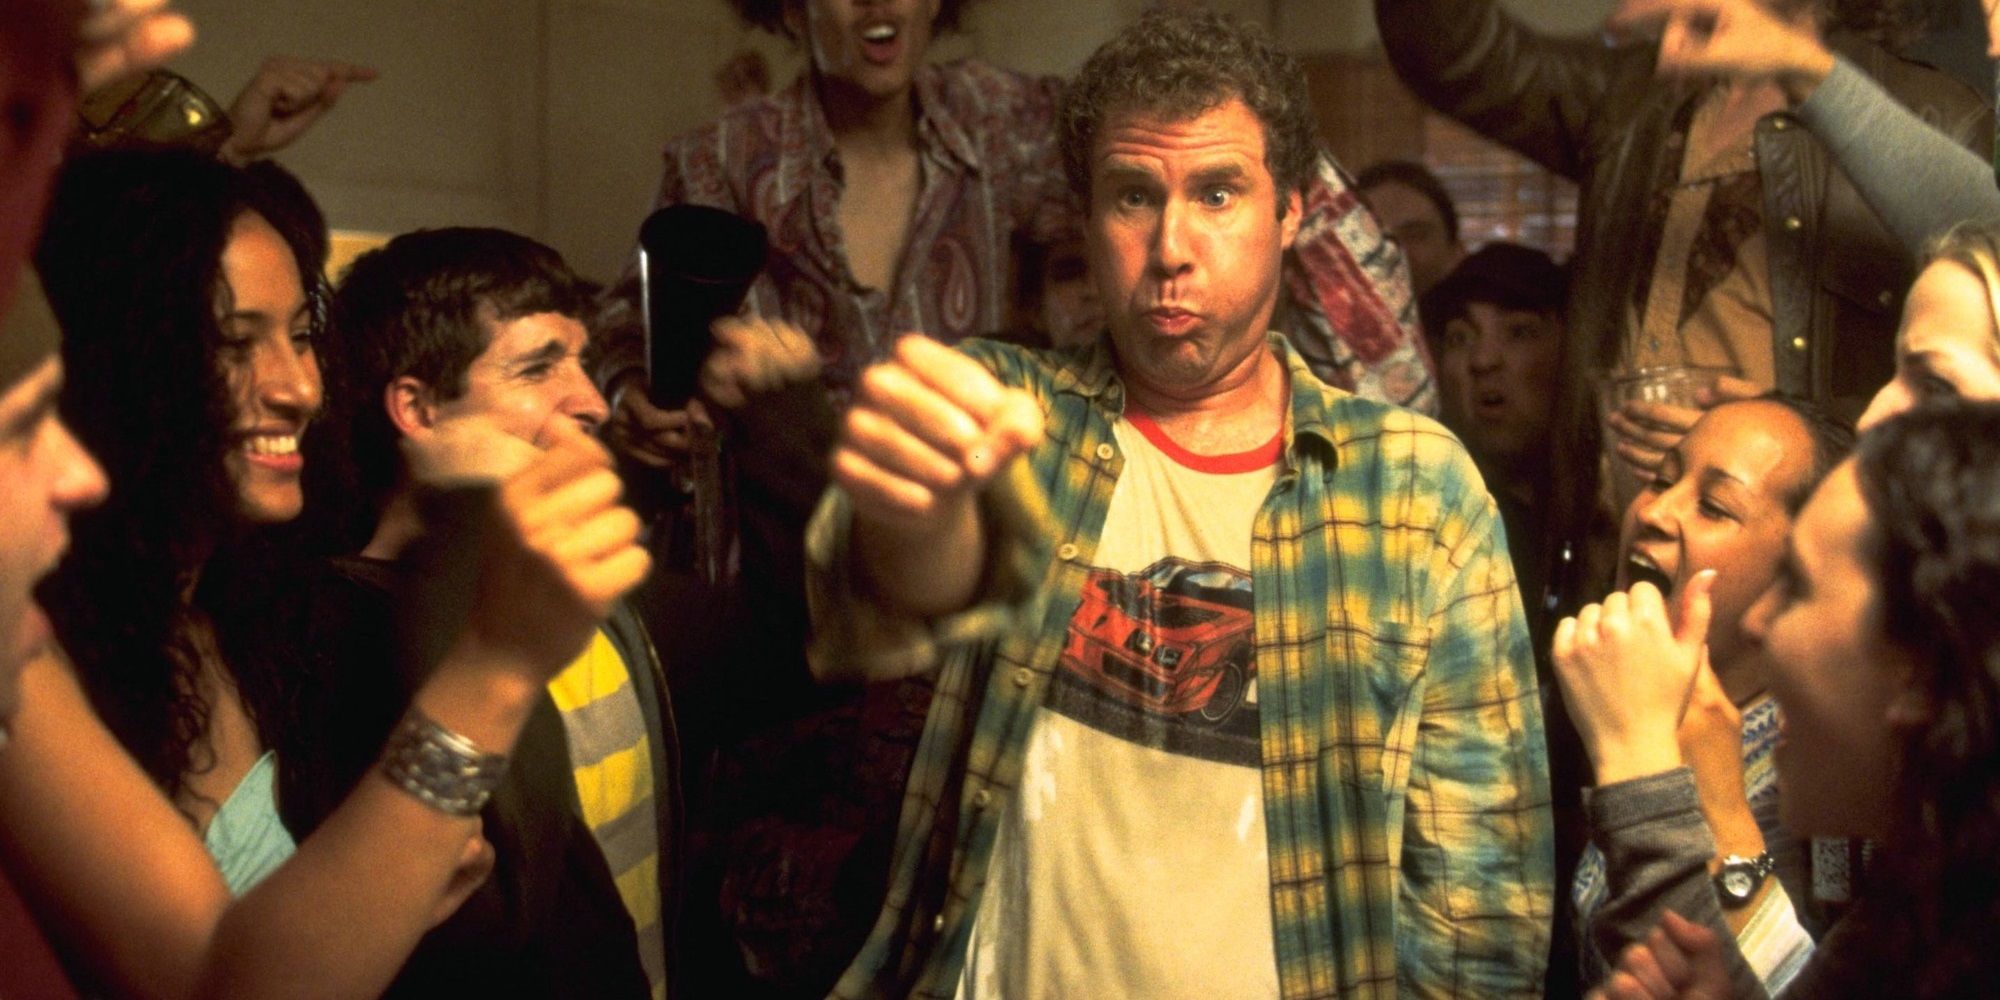 Will Ferrell partying in Old School